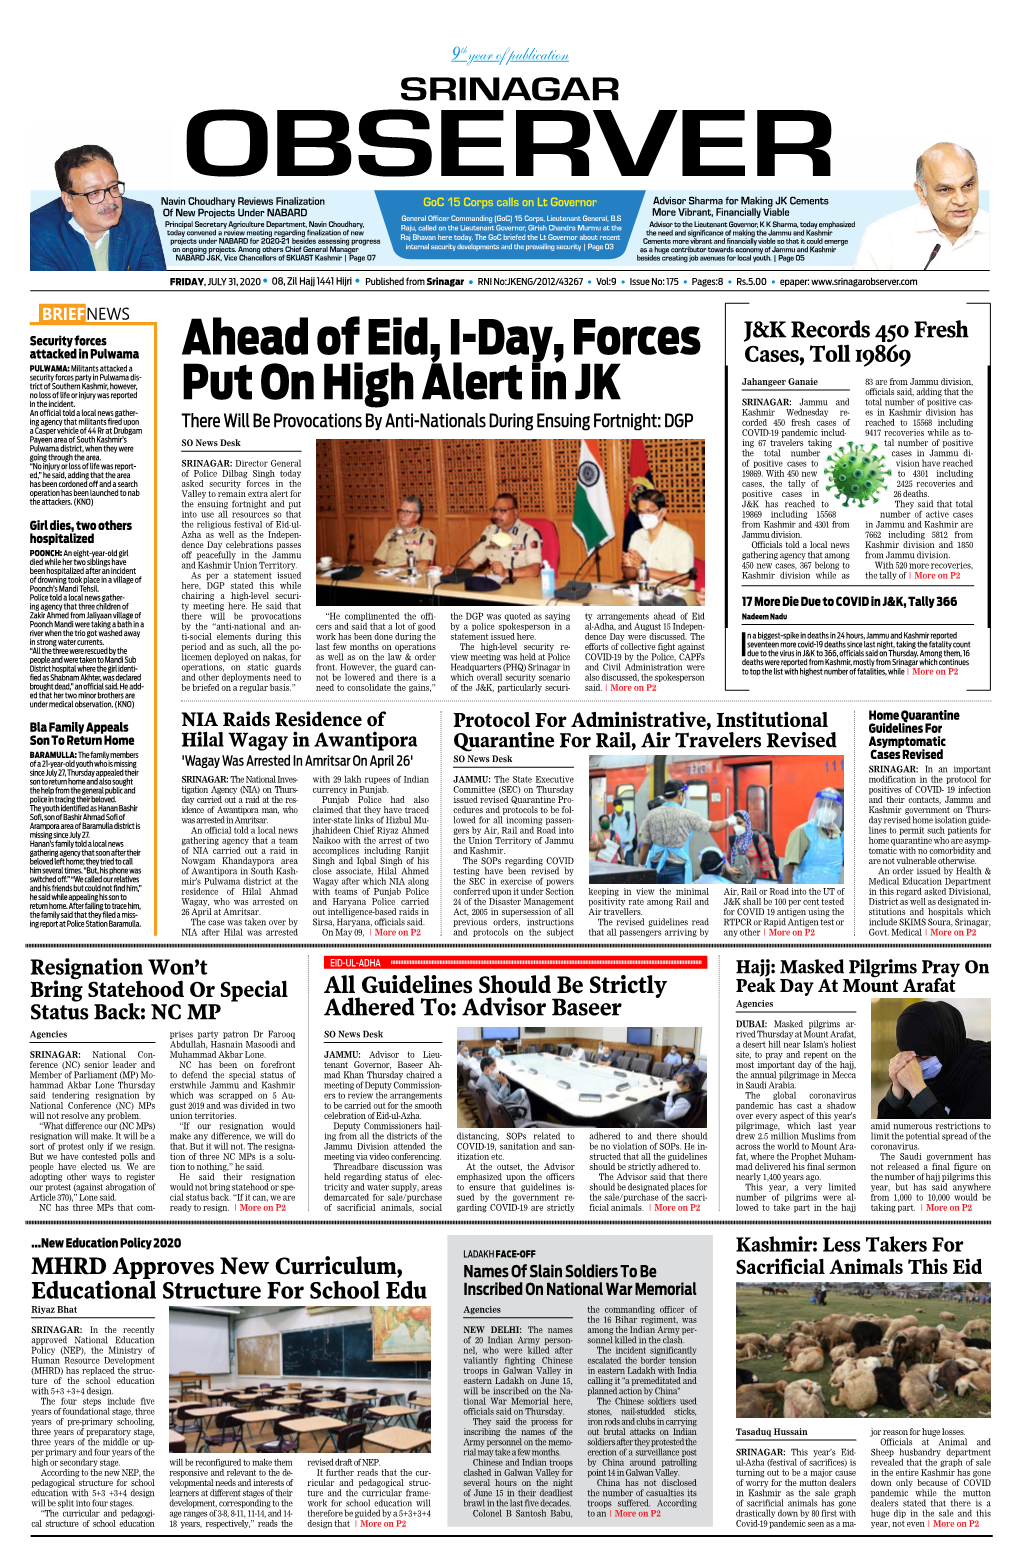 Ahead of Eid, I-Day, Forces Put on High Alert in JK